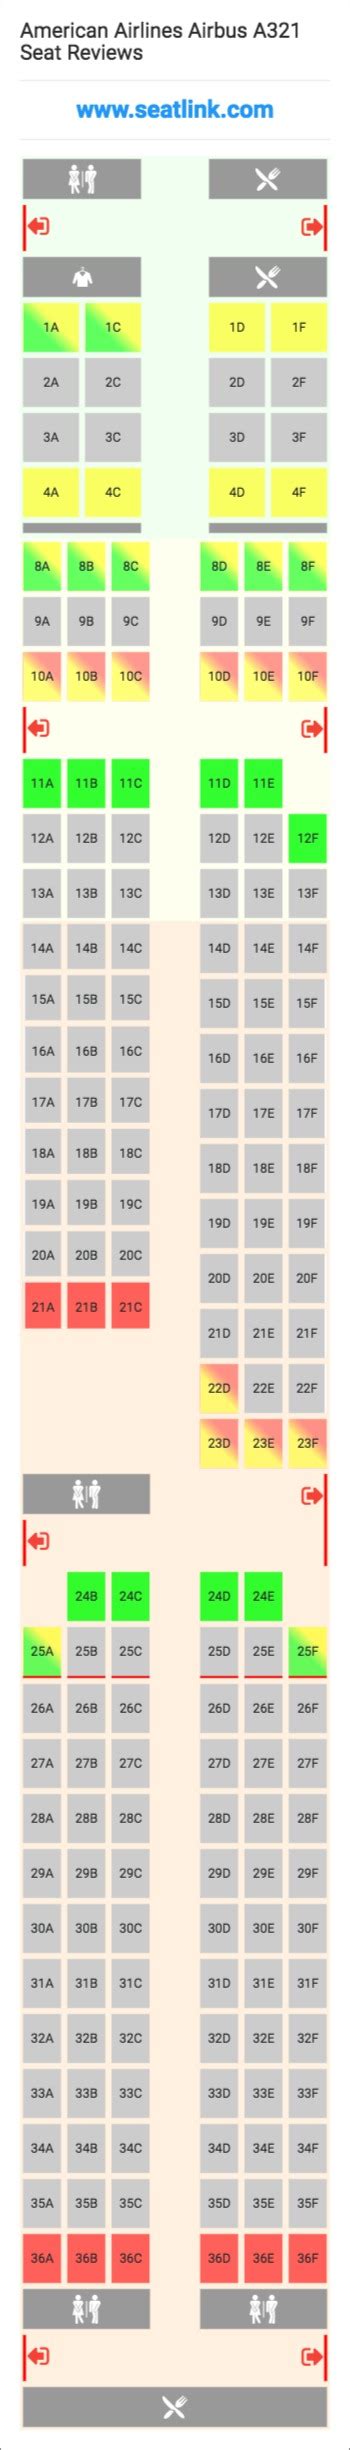 American Airlines A321 Seating Chart